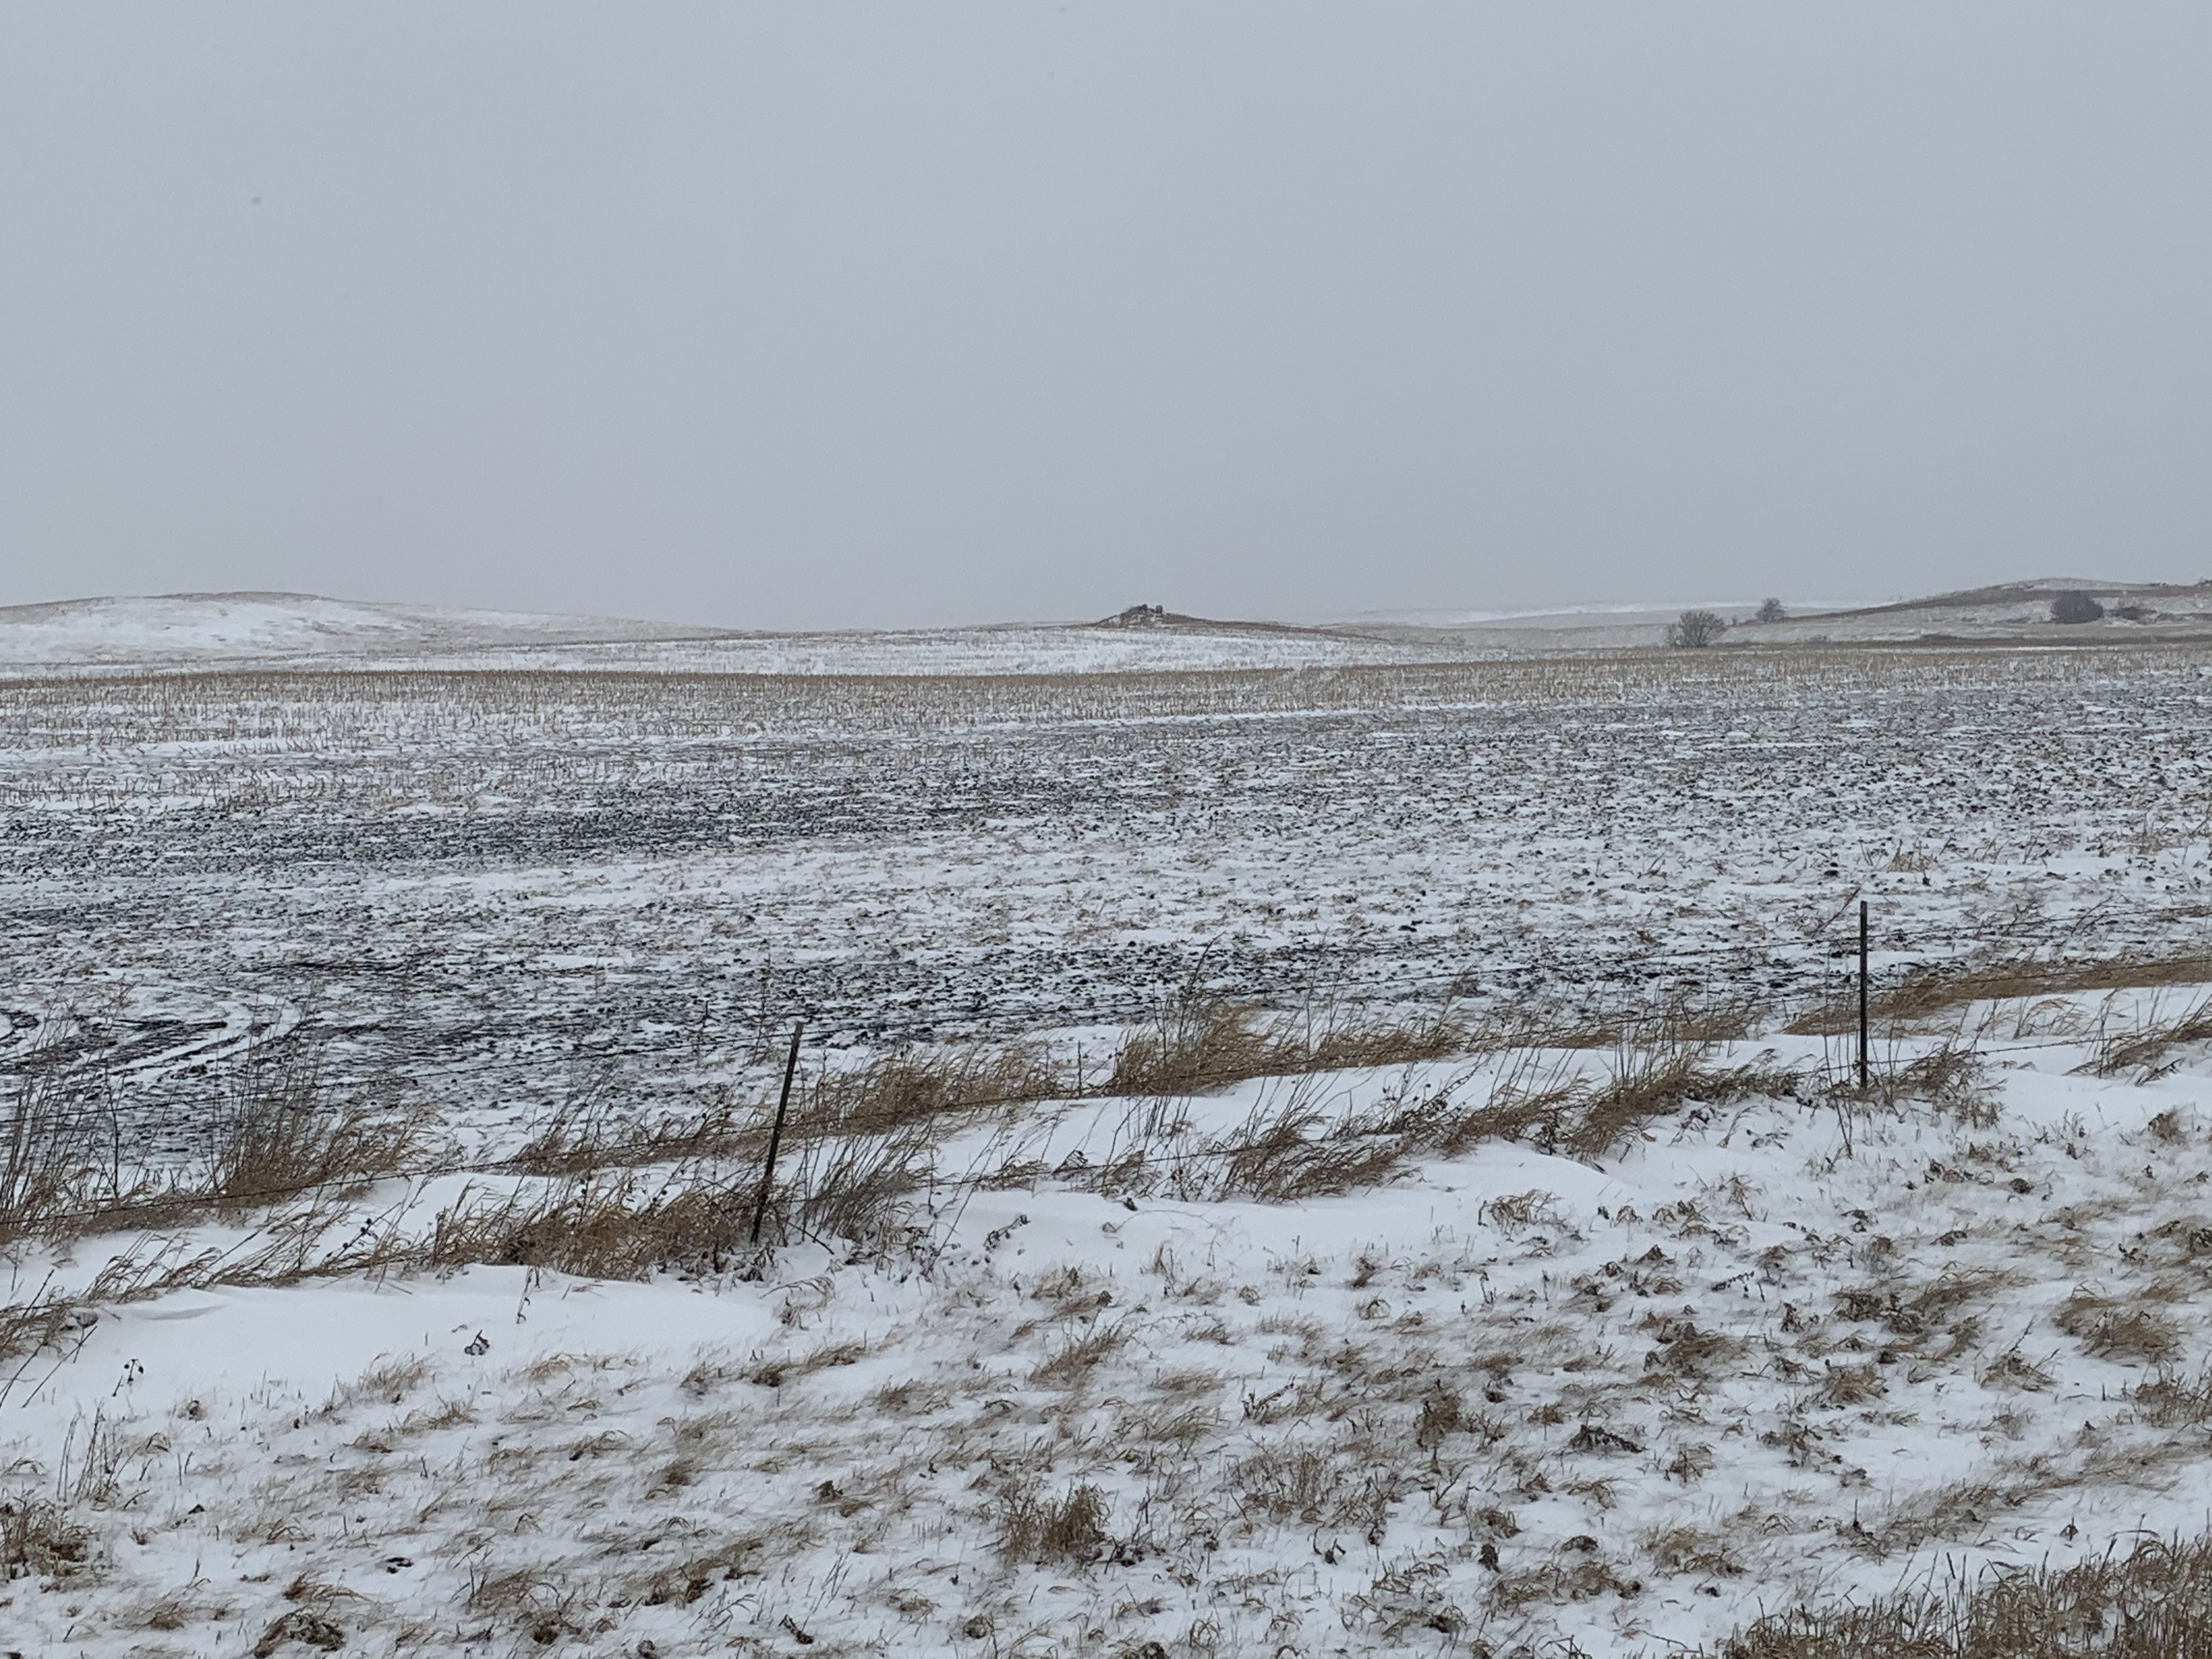 Afternoon Ag News, April 15, 2021: Recent snow and rain are a welcome sight for many producers in central North Dakota